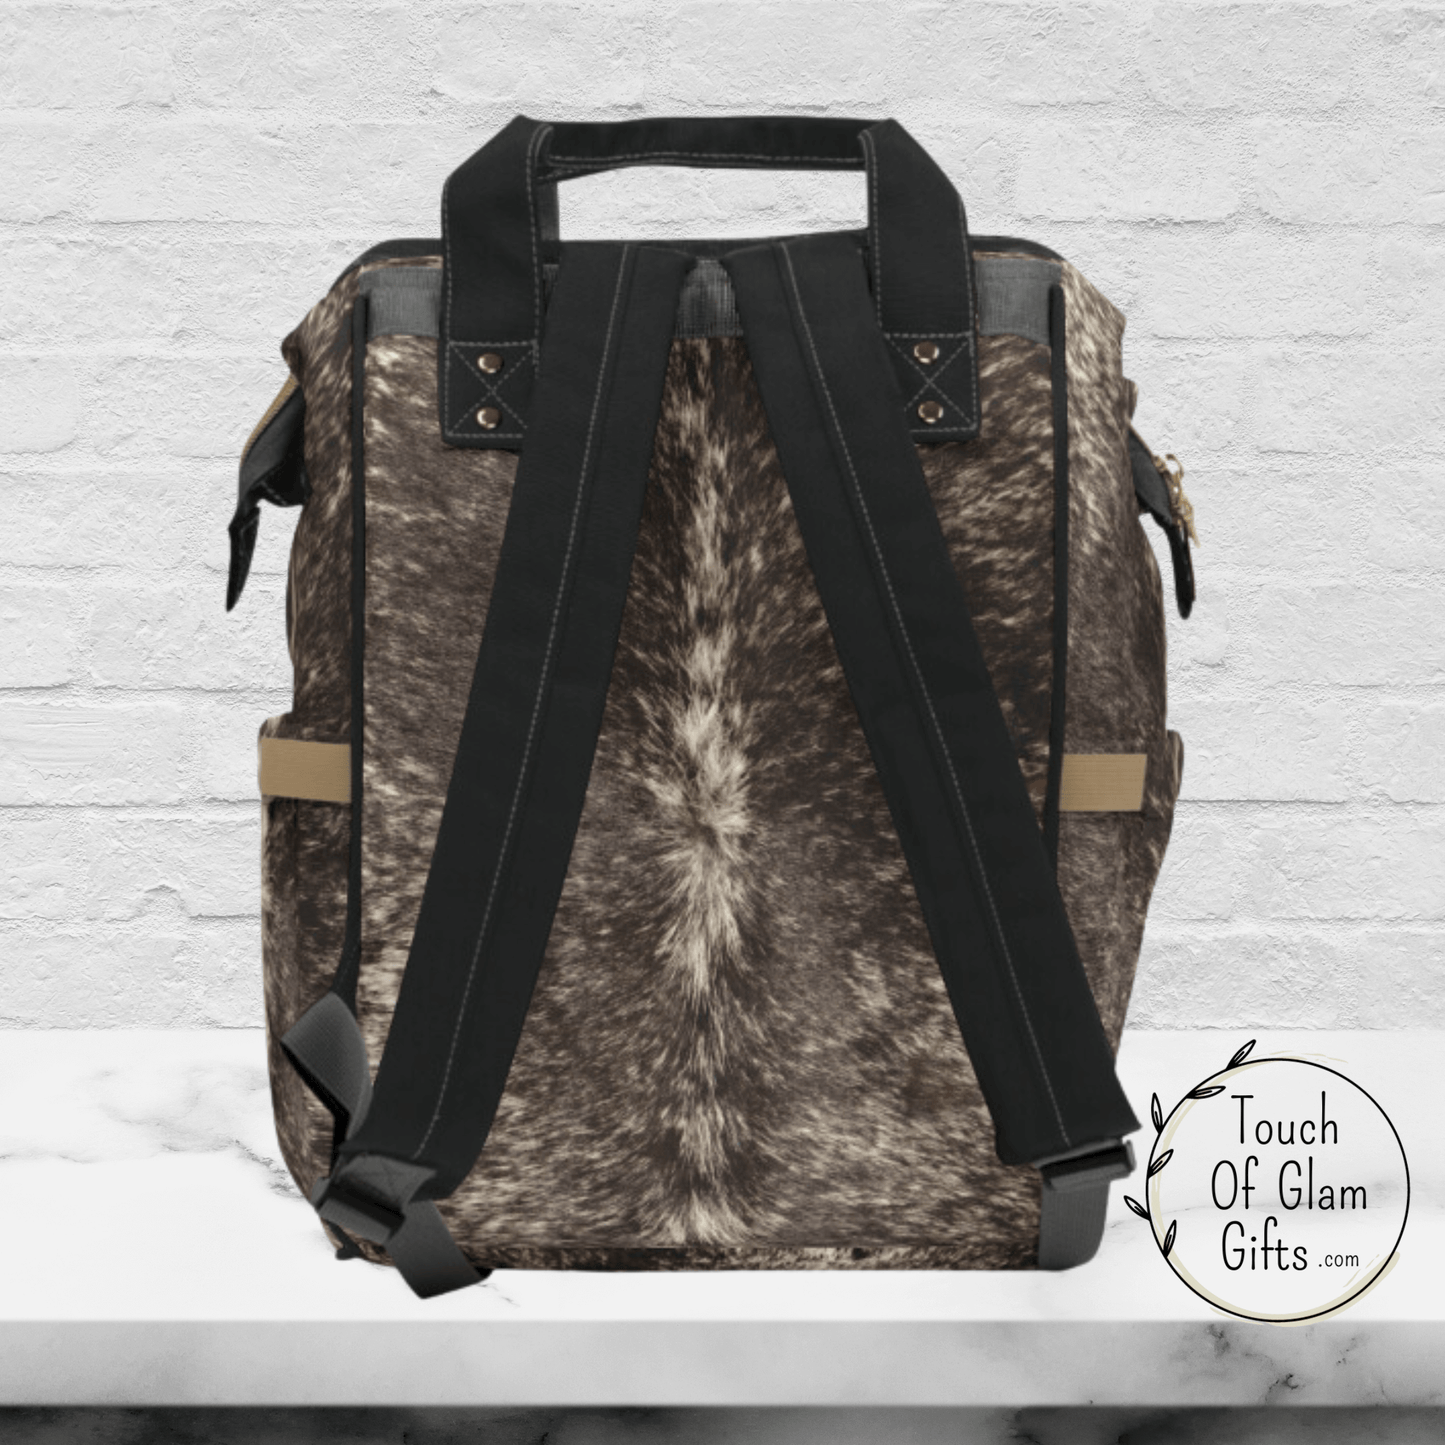 The back side of our cow print backpack shows the padded shoulder straps in black and handles in black.